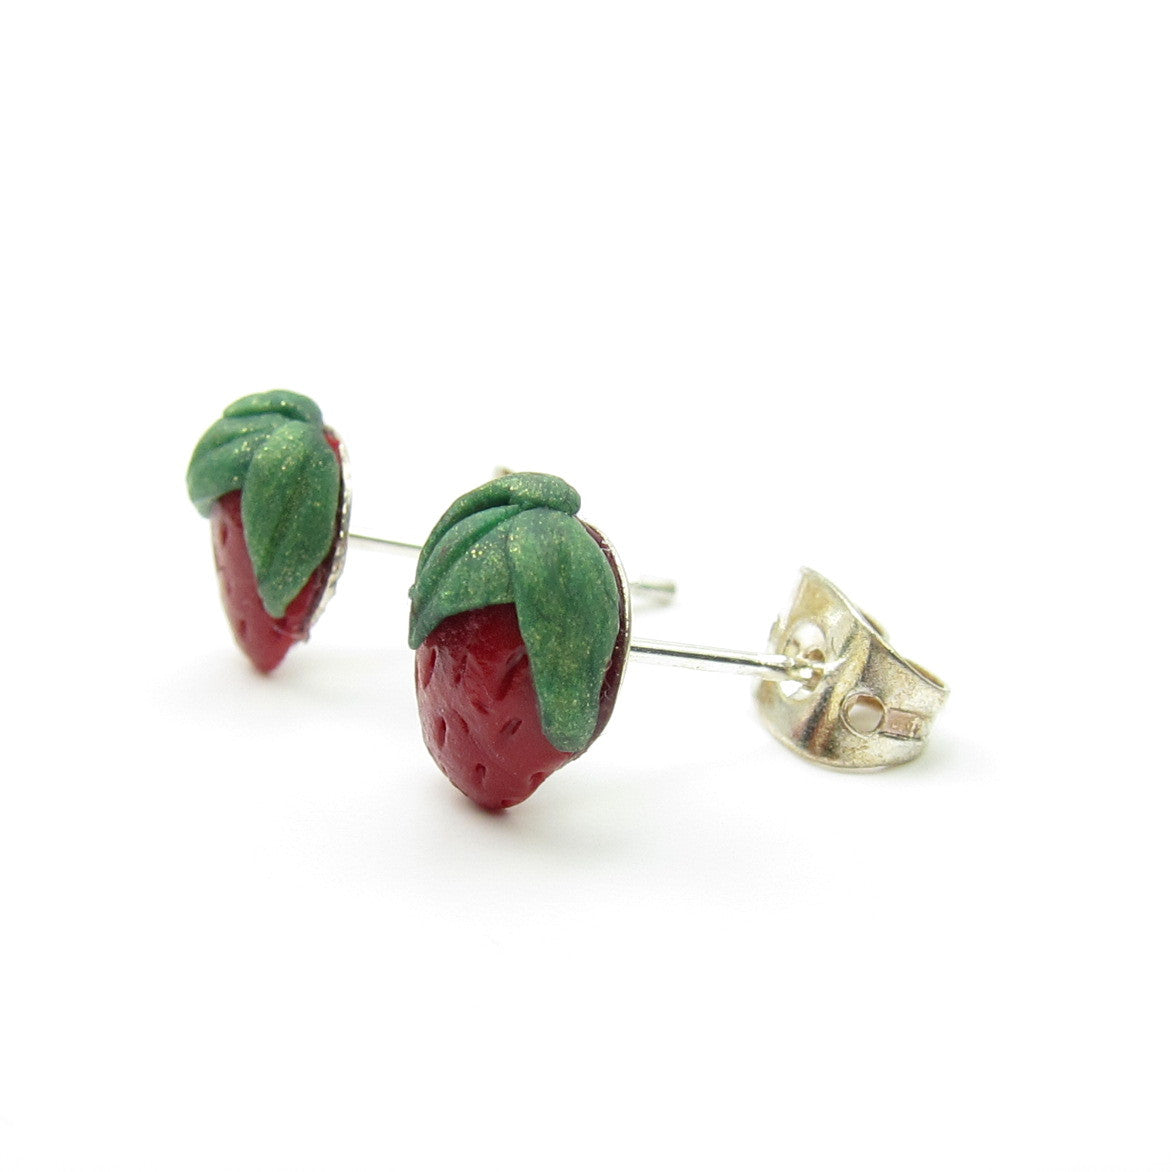 Strawberry Earrings Polymer Clay Miniature Strawberries on Posts ...